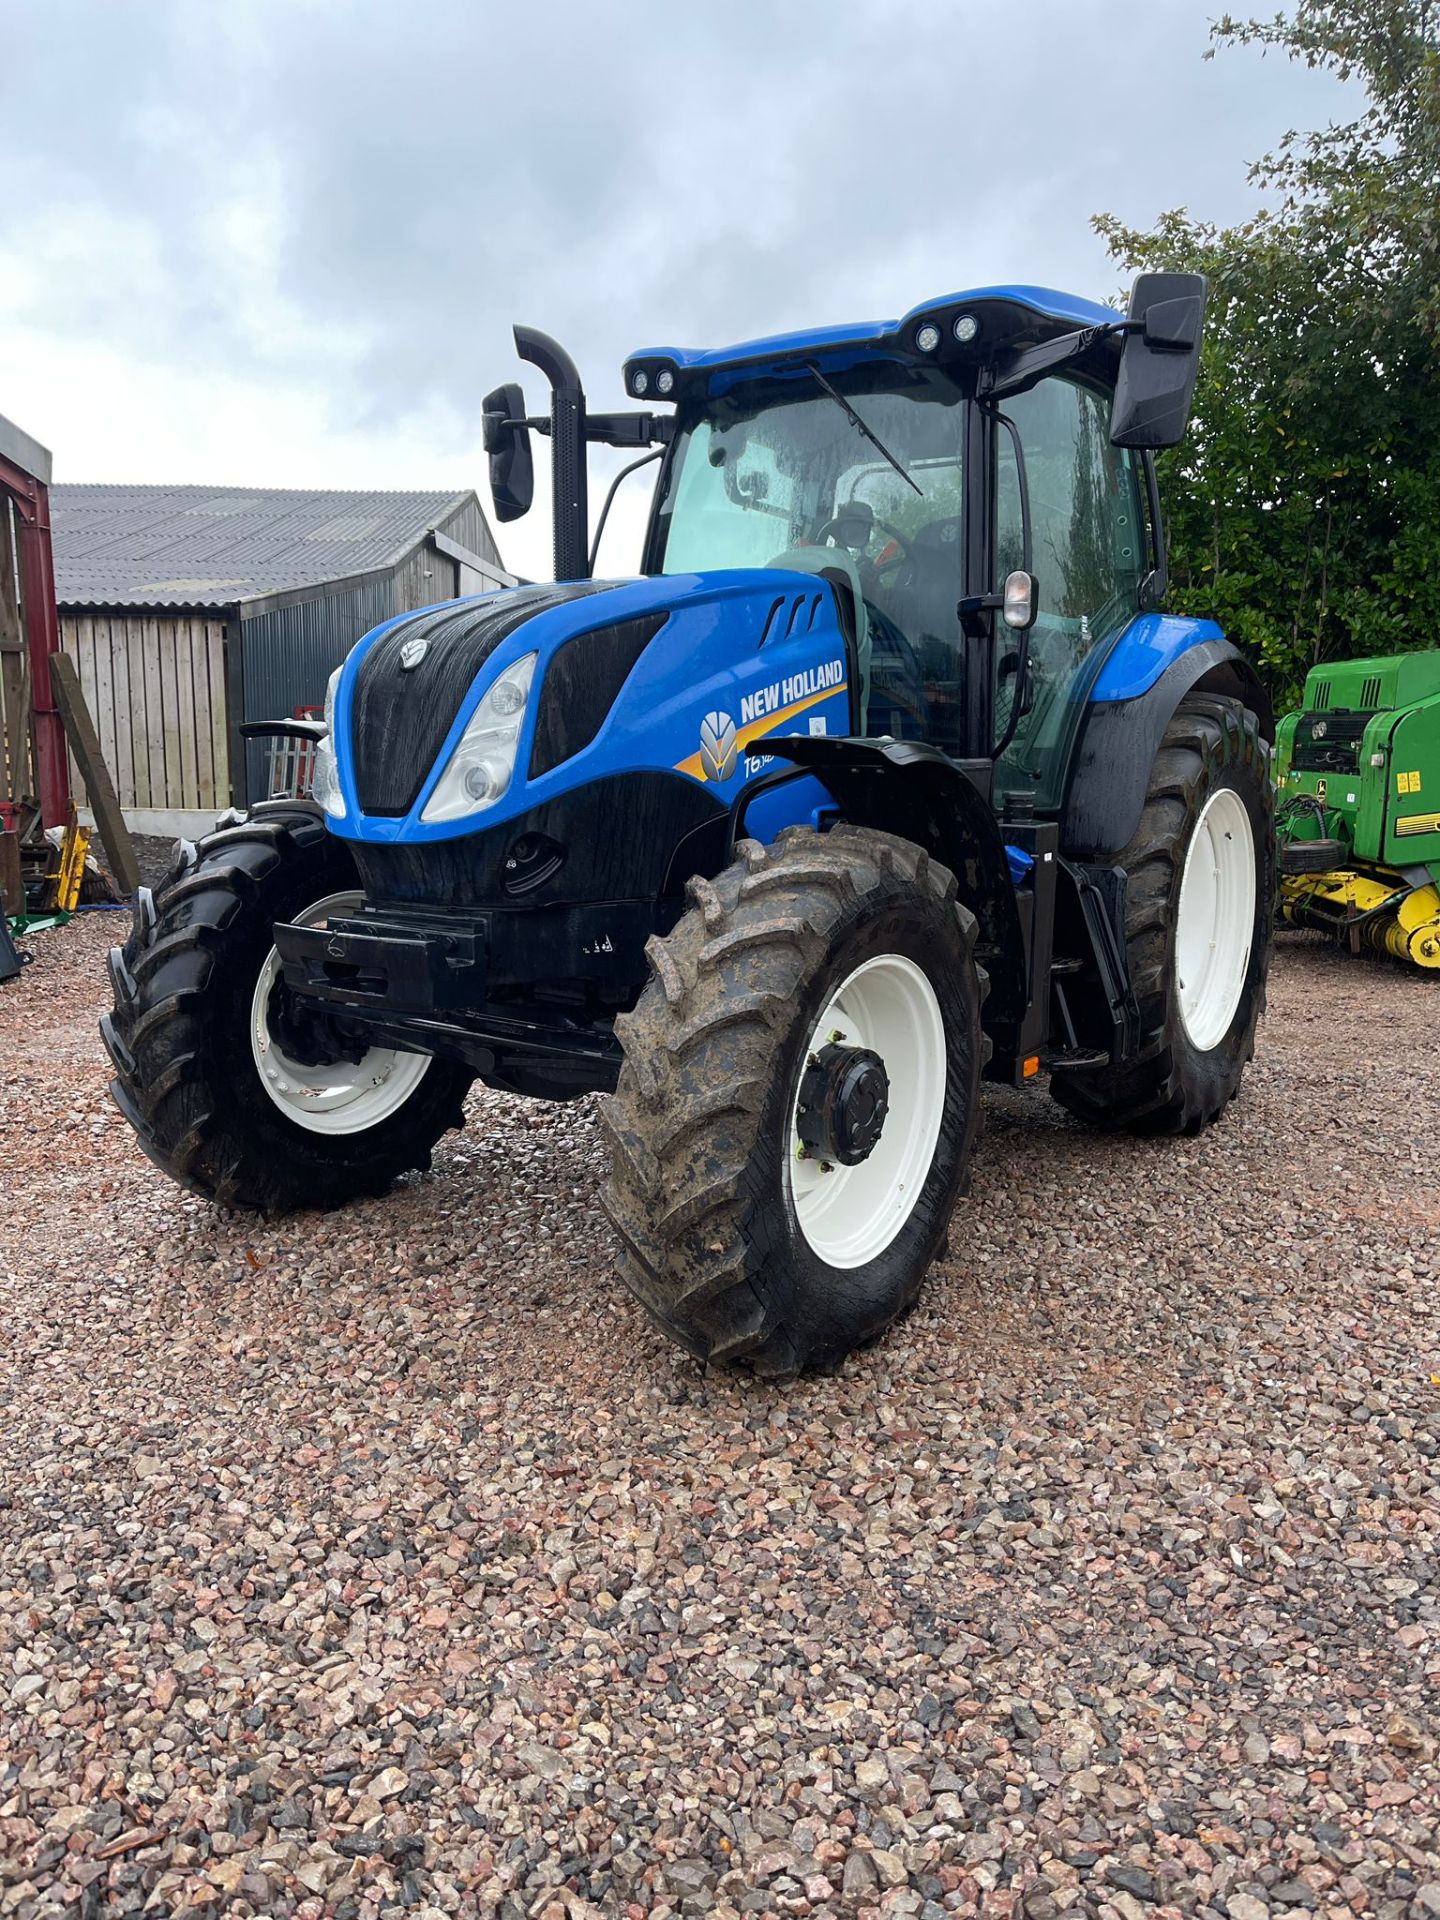 NEW HOLLAND T6.145 TRACTOR